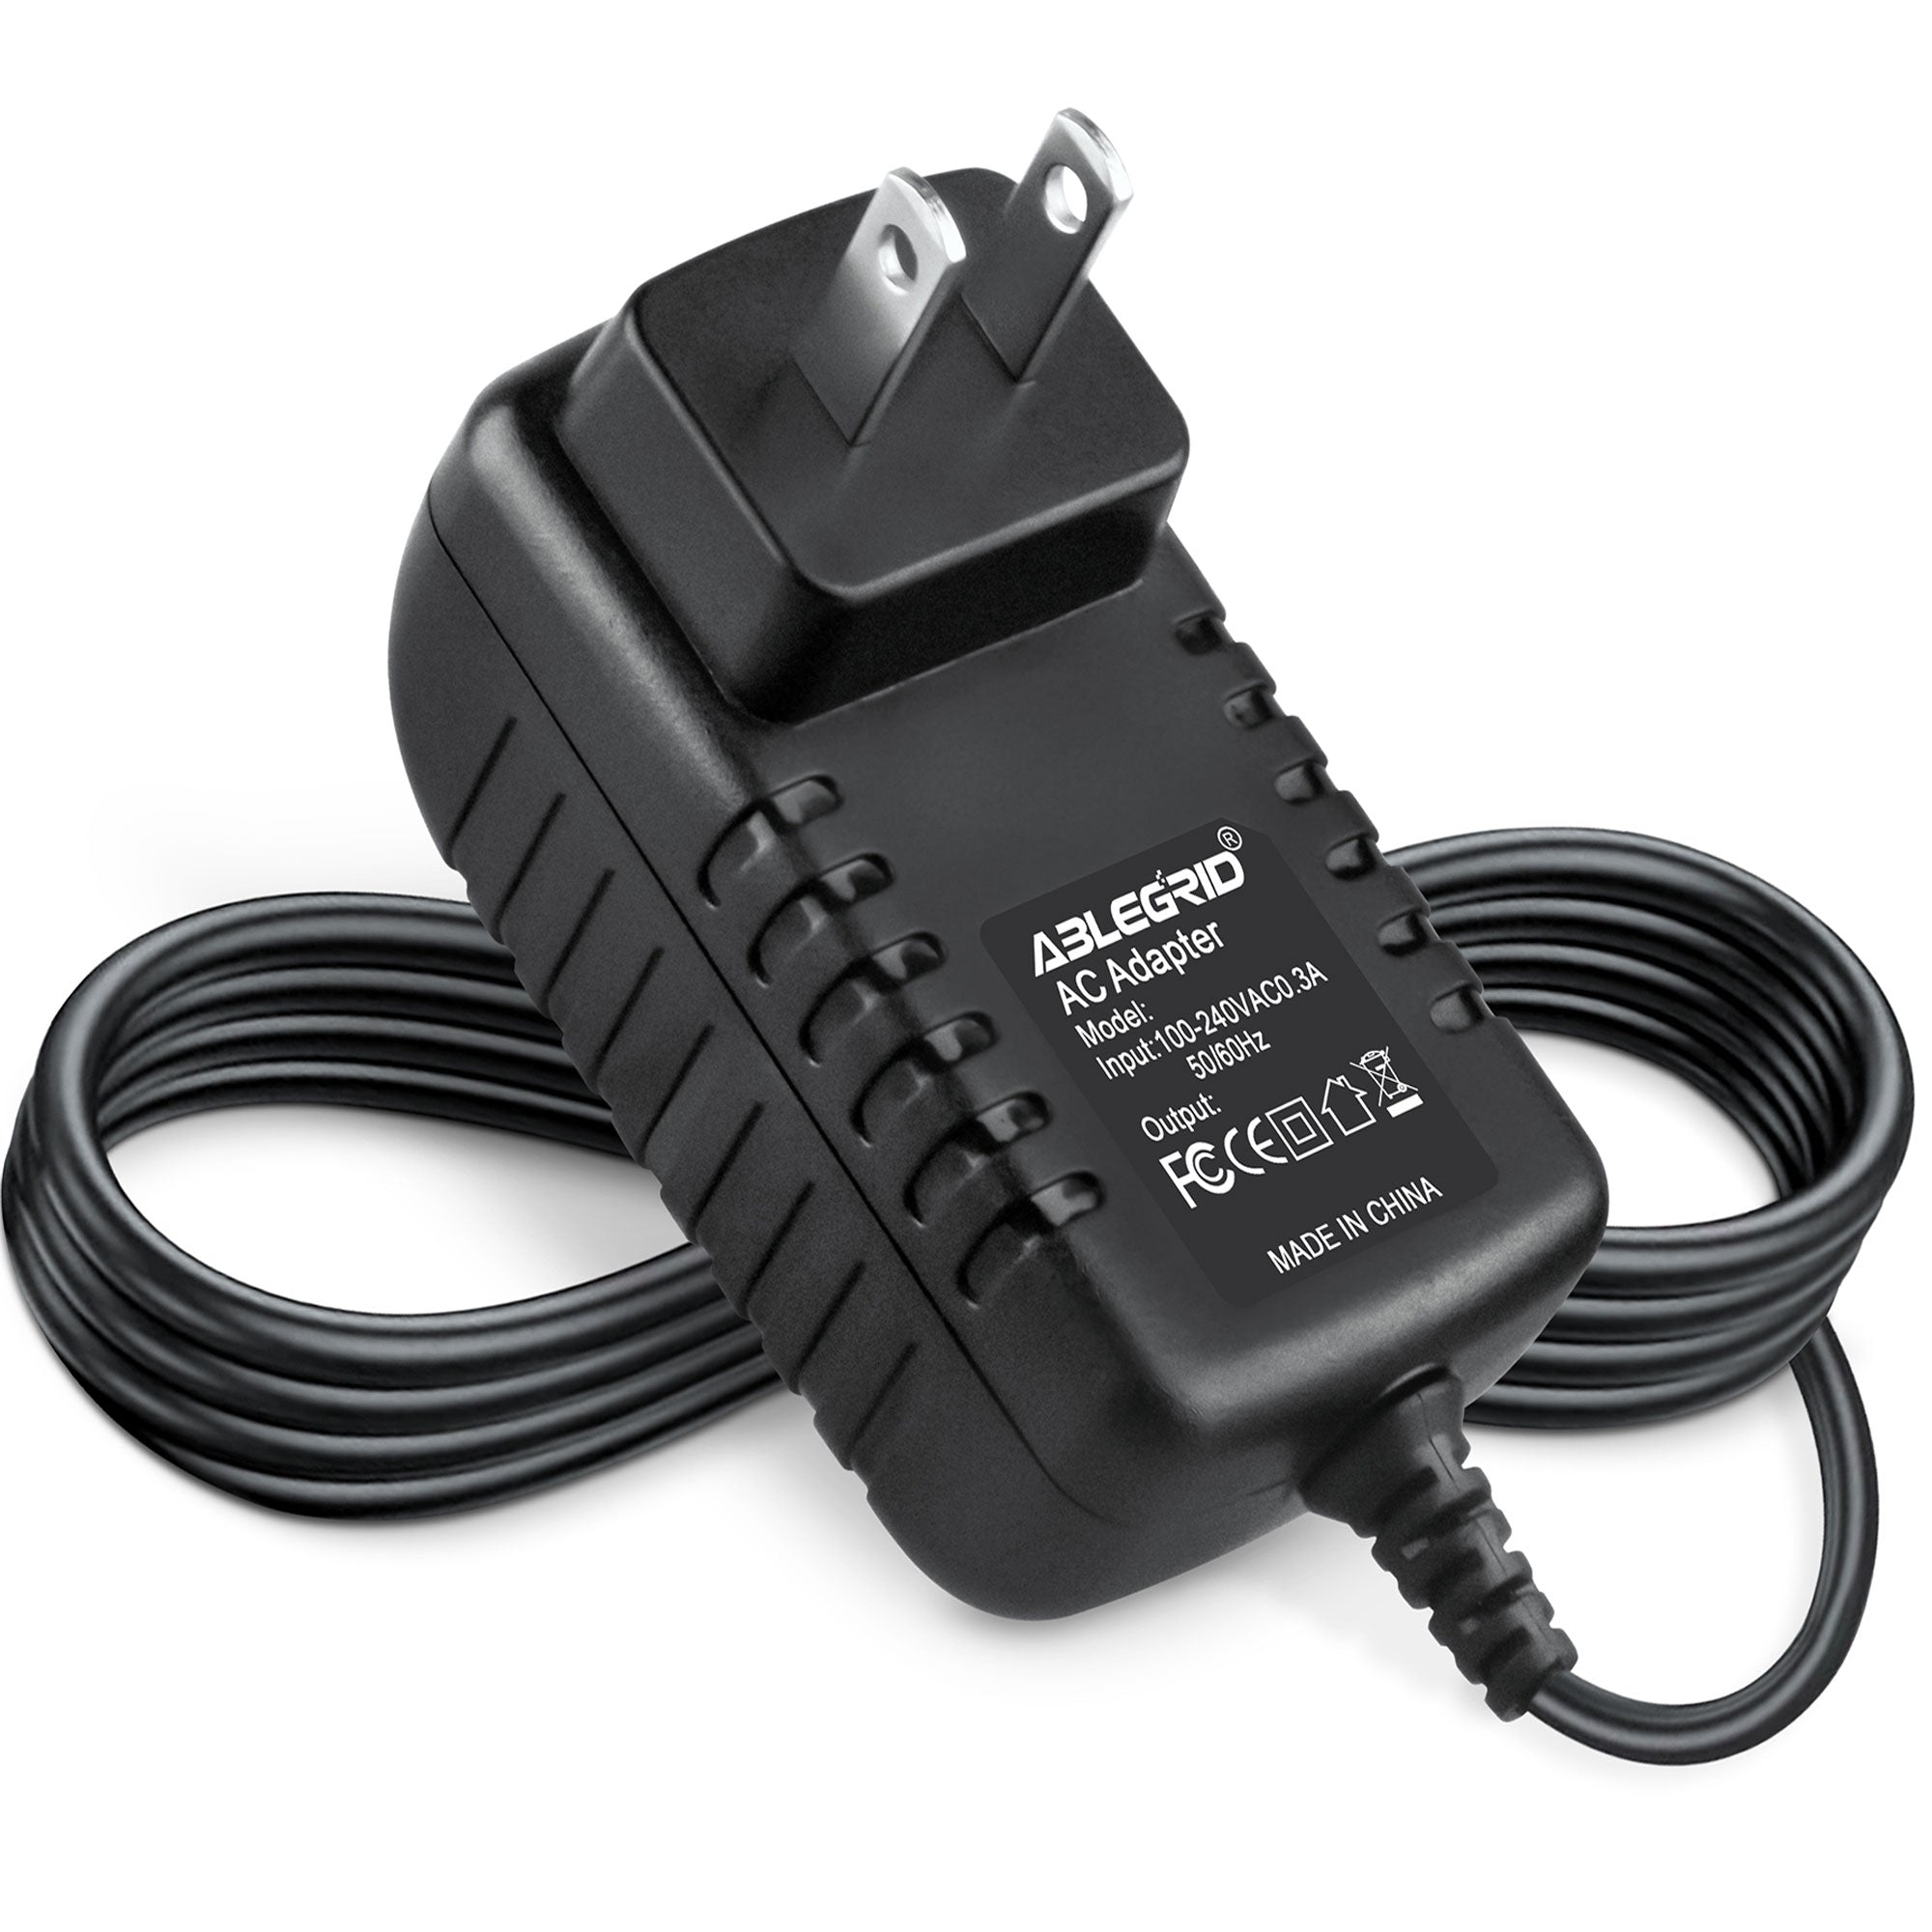 AbleGrid AC / DC Adapter for Cobra MicroTalk CXT225, CXT225C, CXT235, CXT235C, CXT400C 2-Way Radio Power Supply Cord Cable PS Charger Input: 100 - 240 VAC 50/60Hz Worldwide Voltage Use PSU